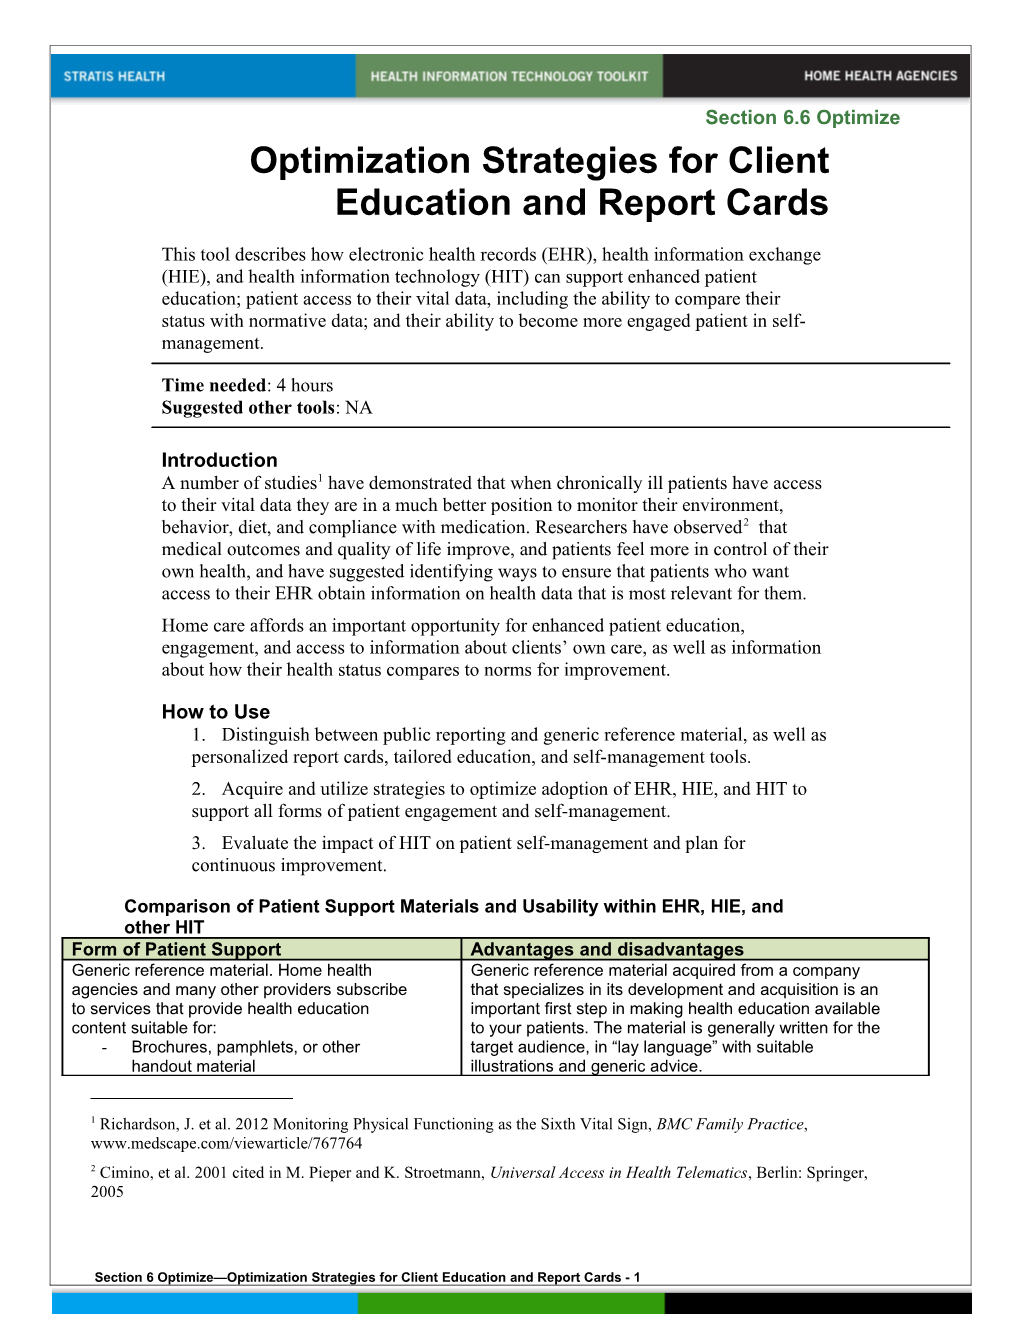 6 Optimization Strategies for Client Education and Report Cards